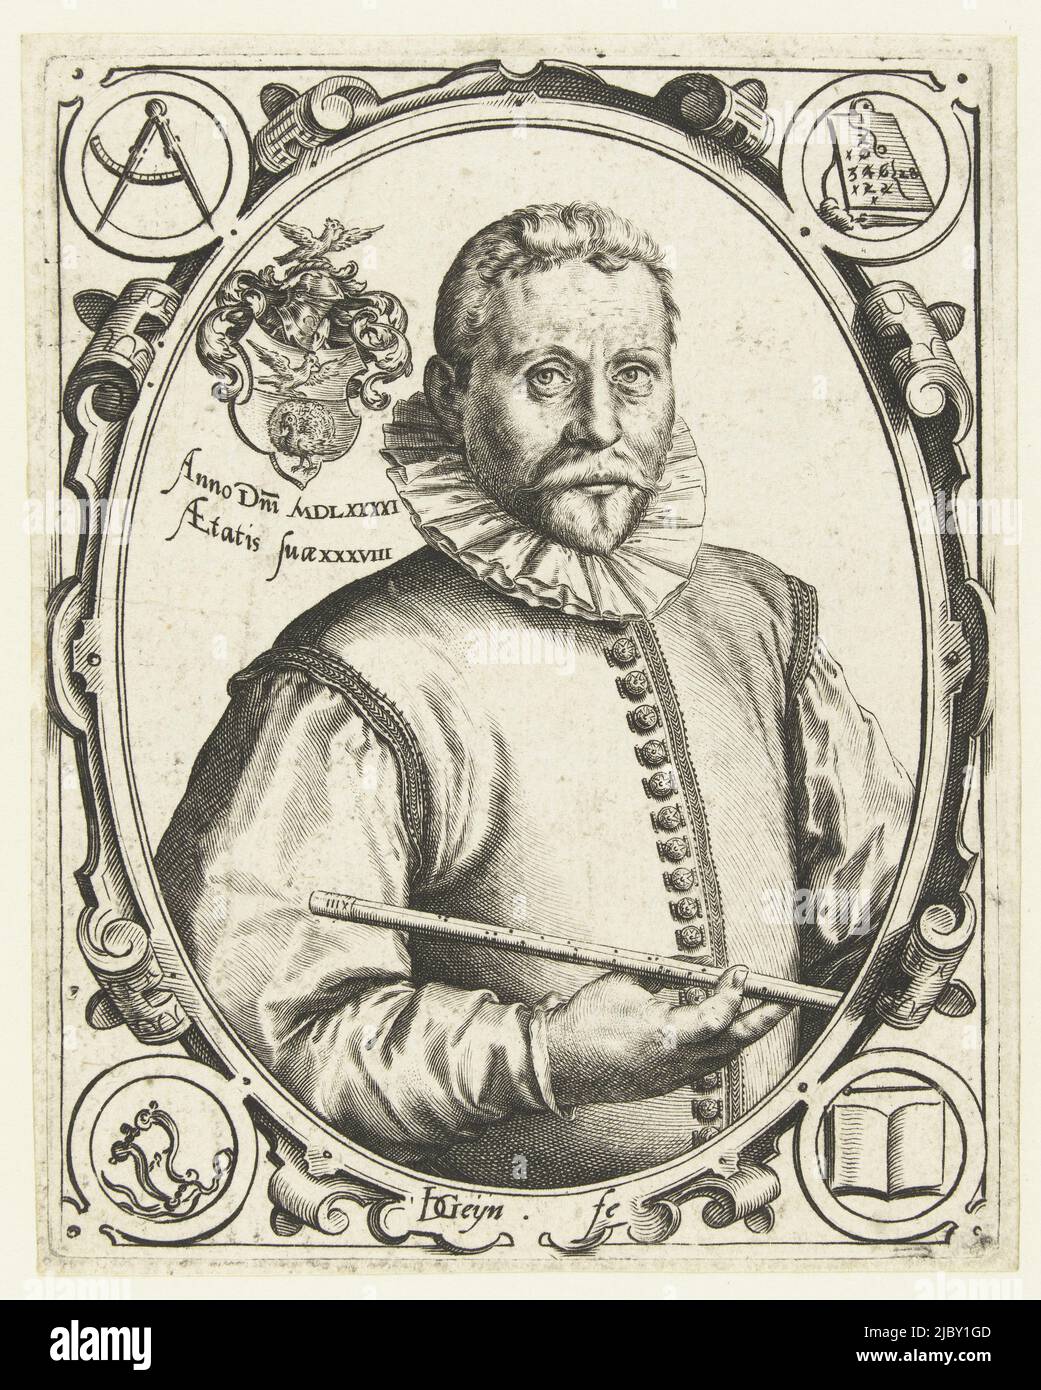 Bust of Vincent Jacobsz. Coster, wine maker and owner of the old maze in Amsterdam, in oval frame. Next to Coster's head his coat of arms, in his hand a yardstick. In the four corners next to the oval are depicted a compass, a writing tablet, a book and a knitter, all references to Coster's profession: he was a rich Amsterdam 'wine grower', he measured the amount of wine in the barrels and calculated the tax on it. Because of his profession he was simply called Cent de Peyler, Portrait of Vincent Jacobsz. Coster at the age of 38., print maker: Jacob de Gheyn (II), (mentioned on object Stock Photo